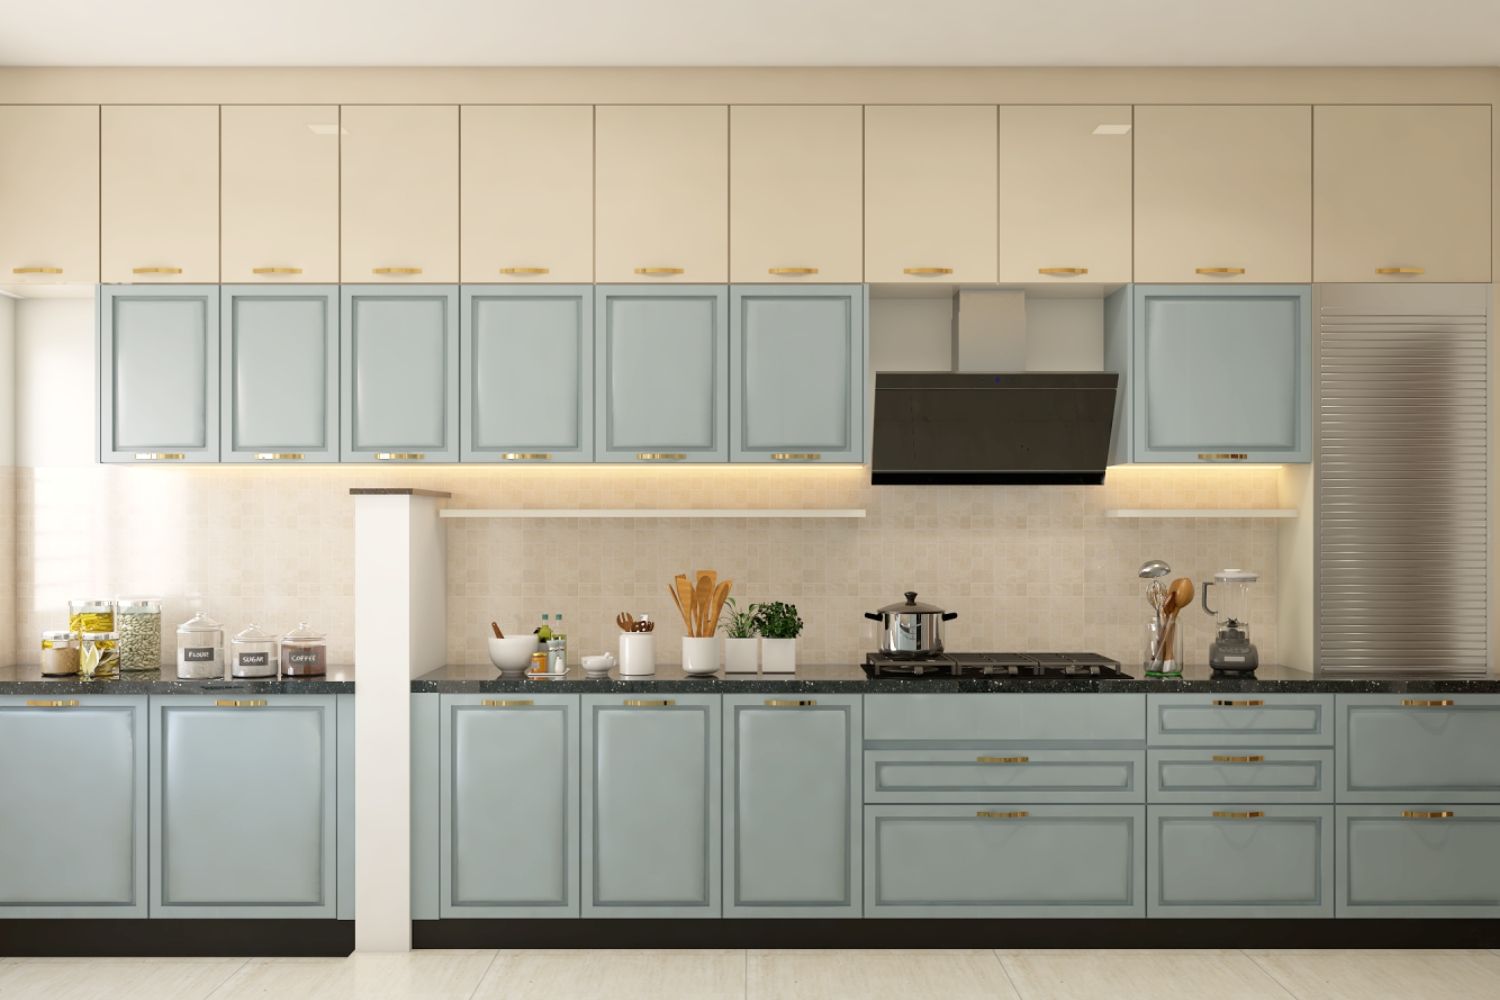 Classic Parallel Kitchen Design With Spacious White And Blue Cabinets